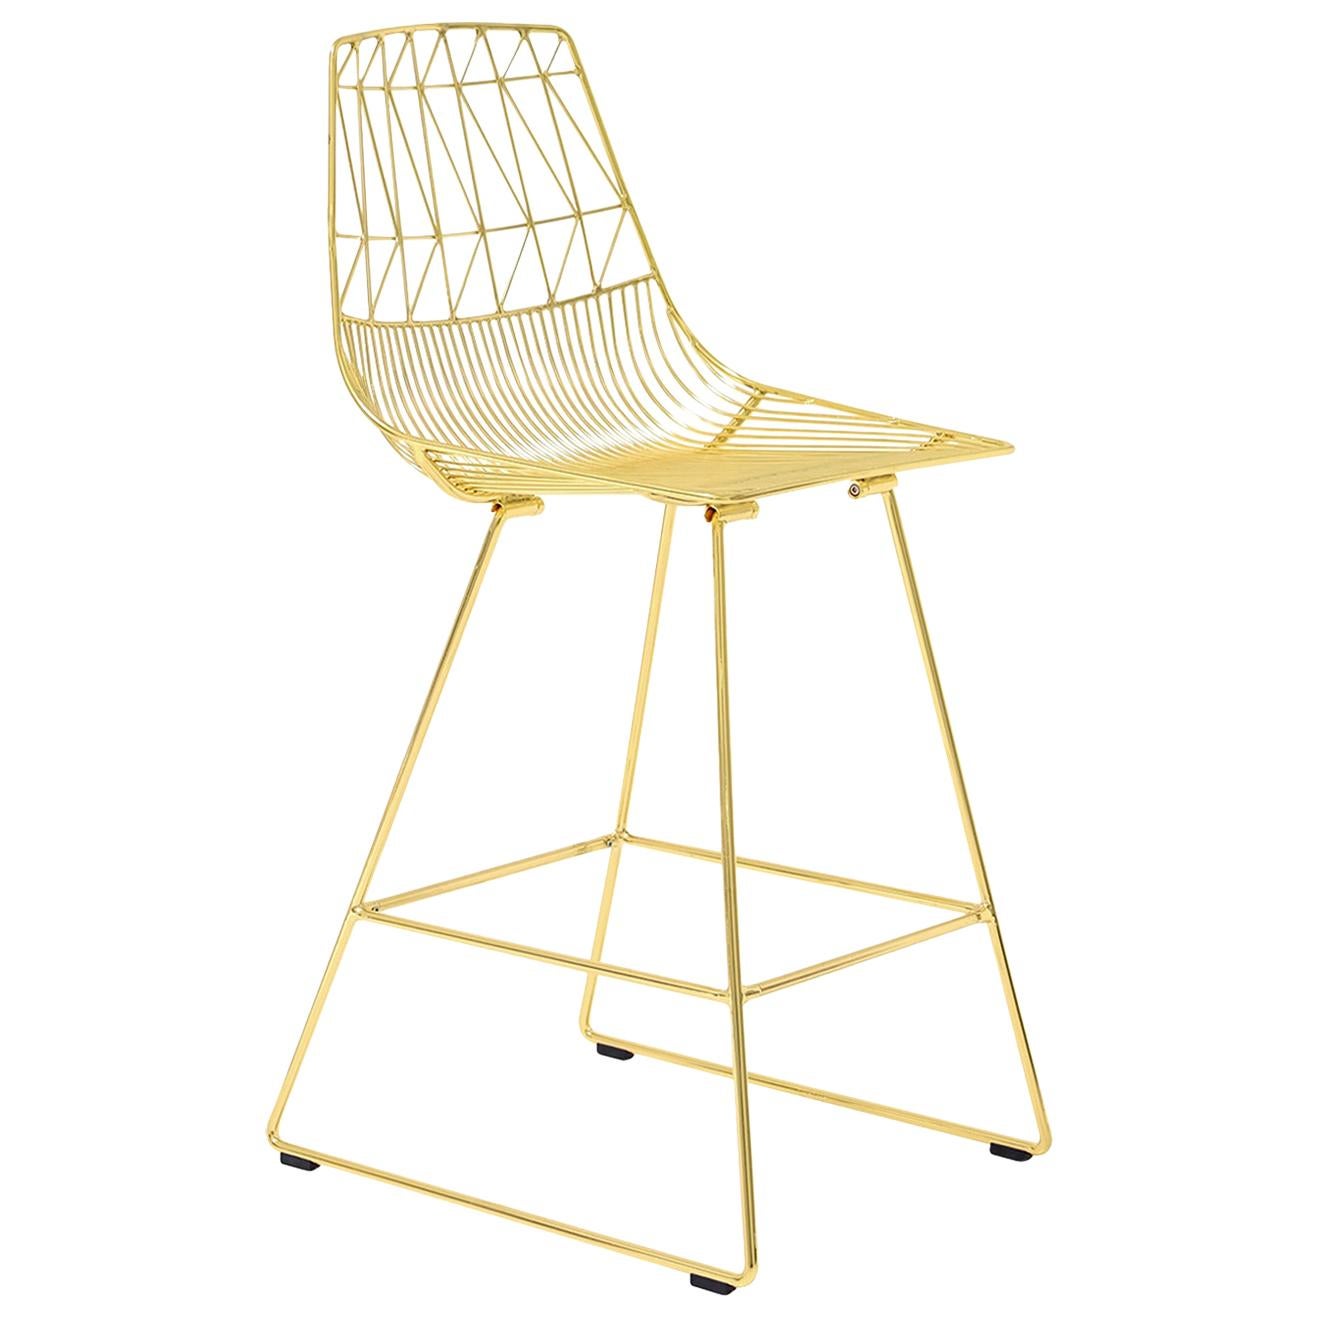 Mid-Century Modern, Minimalist Counter Stool, in Gold by Bend Goods